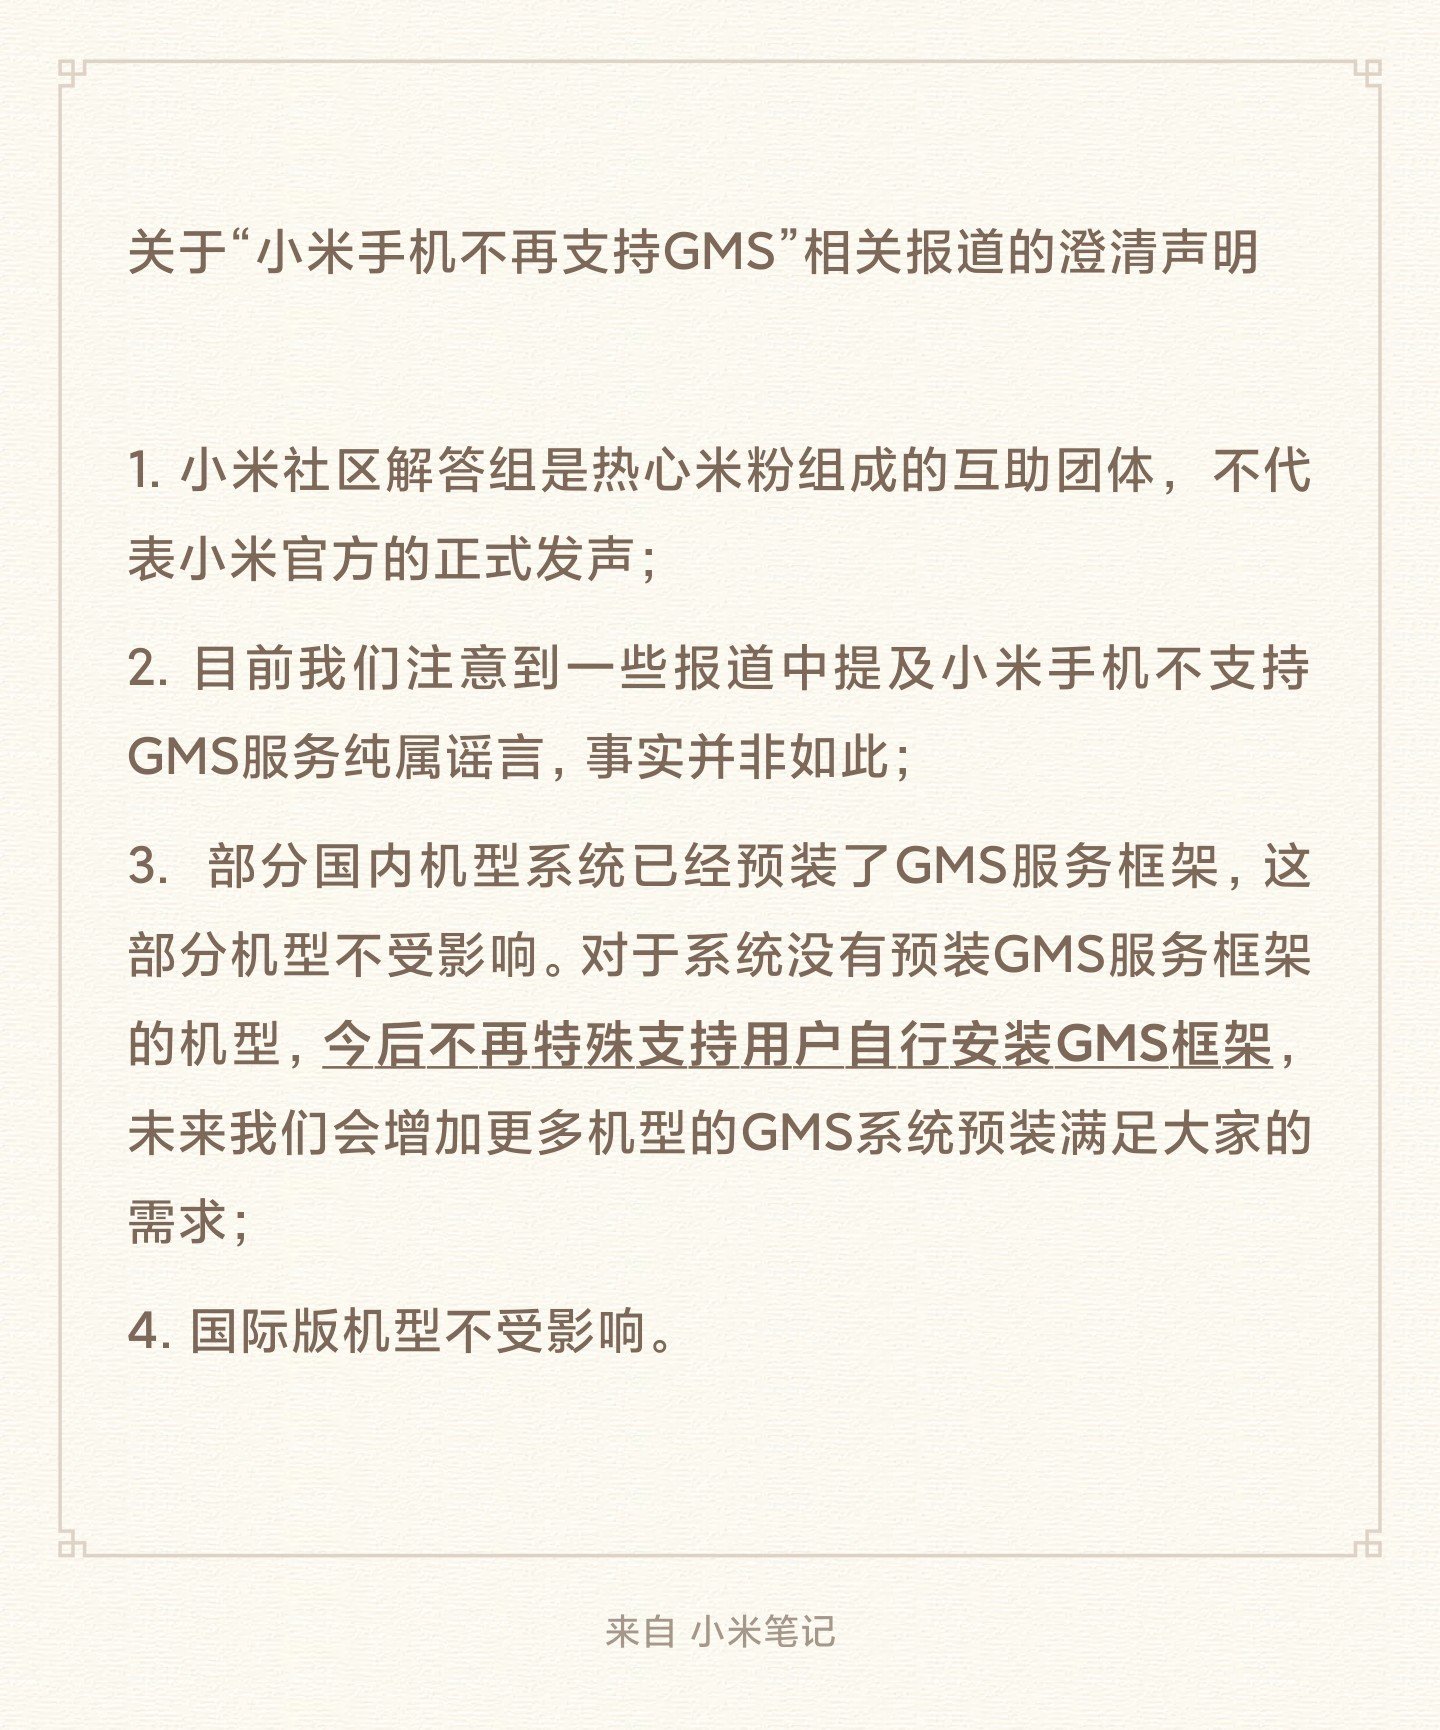 Xiaomi MIUI China ROM GMS Official Statement